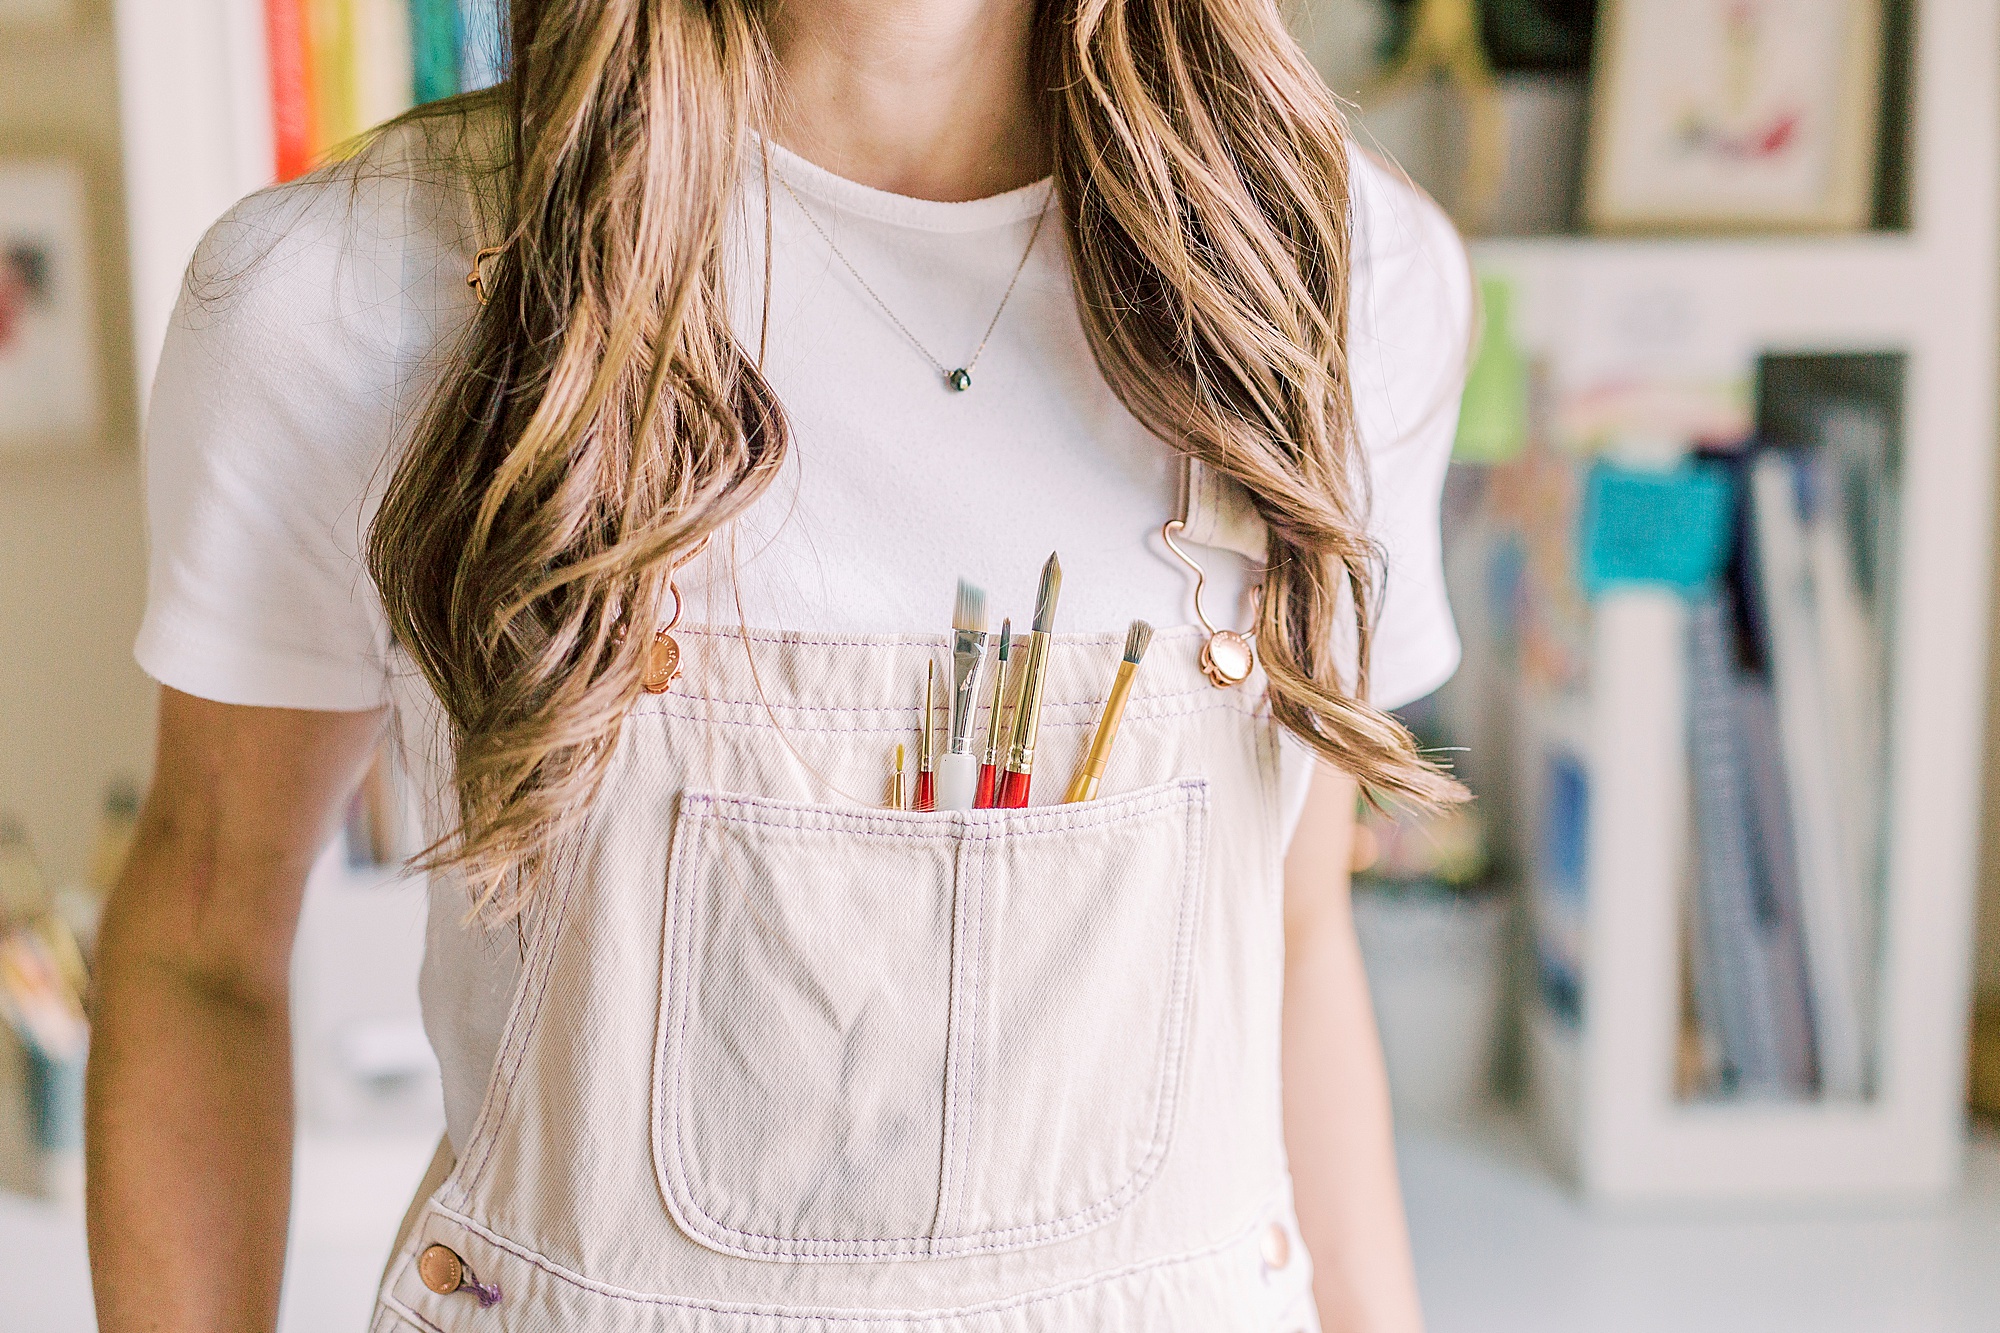 artist holds watercolor brushes in overall pockets